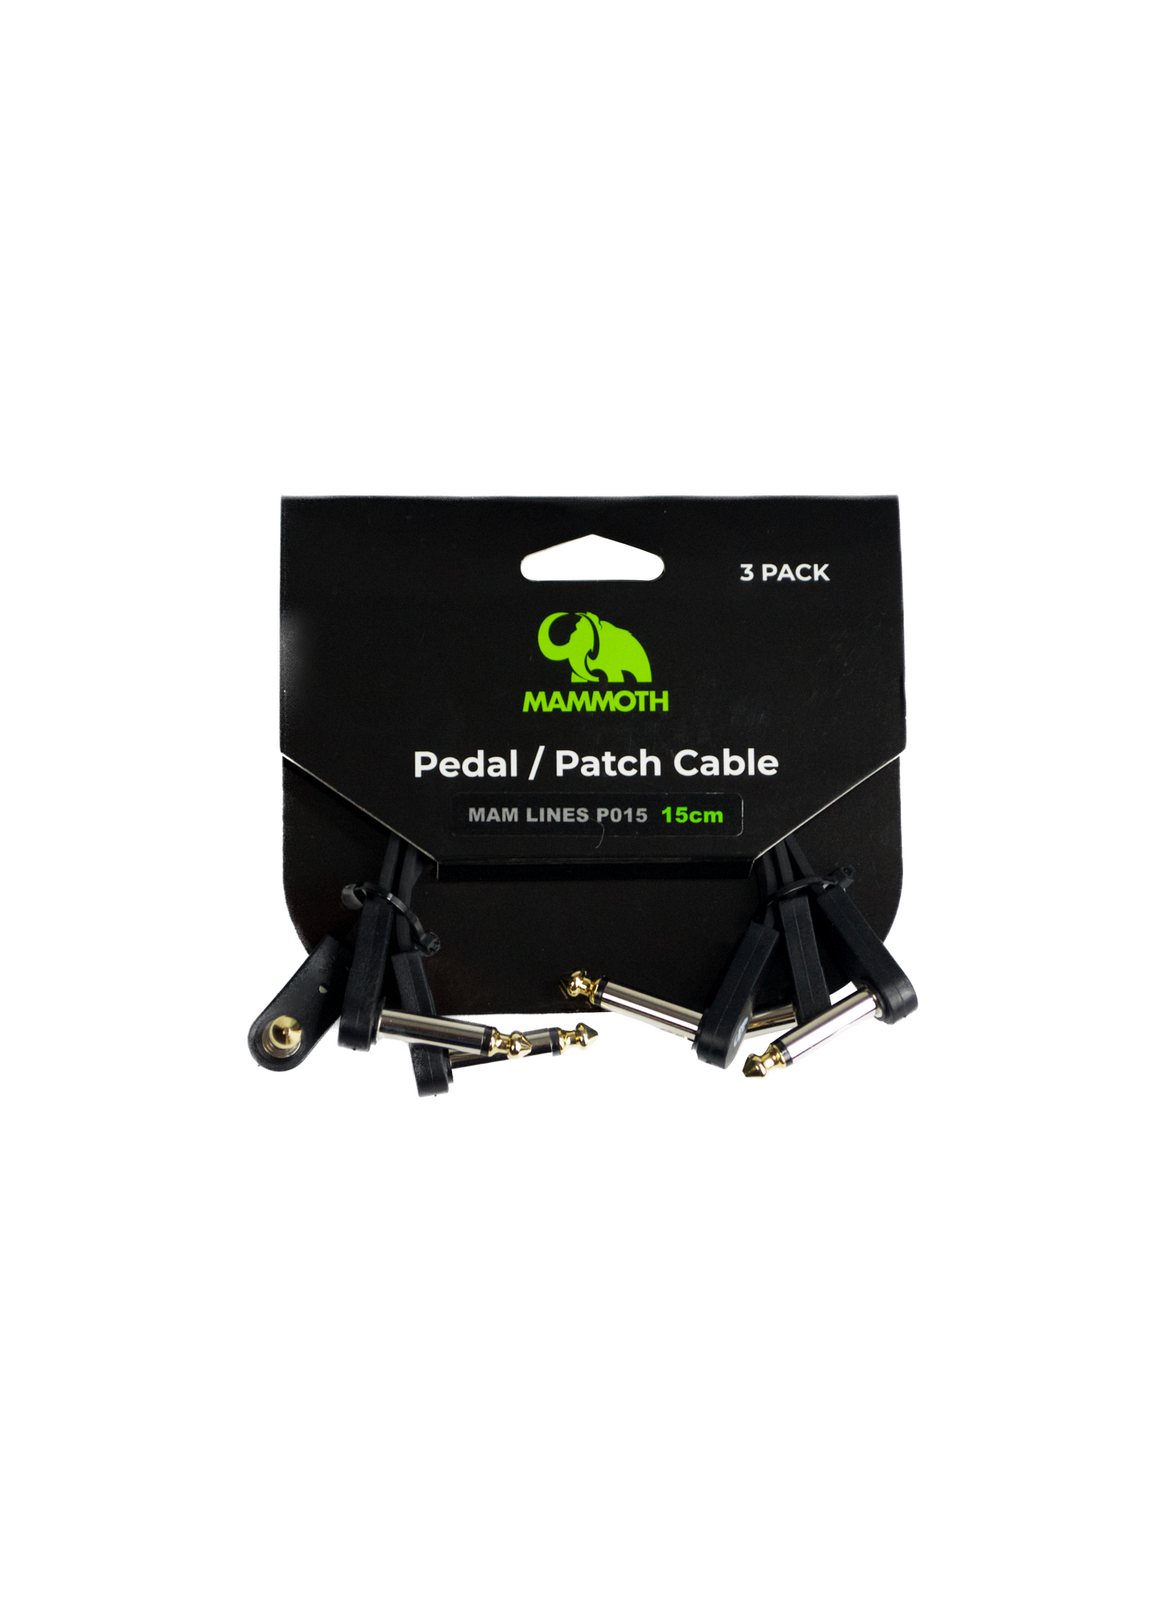 Mammoth Lines P015 3 Pieces 15cm Pedal/Patch Cable, Right angle Jack to Right angle Jack